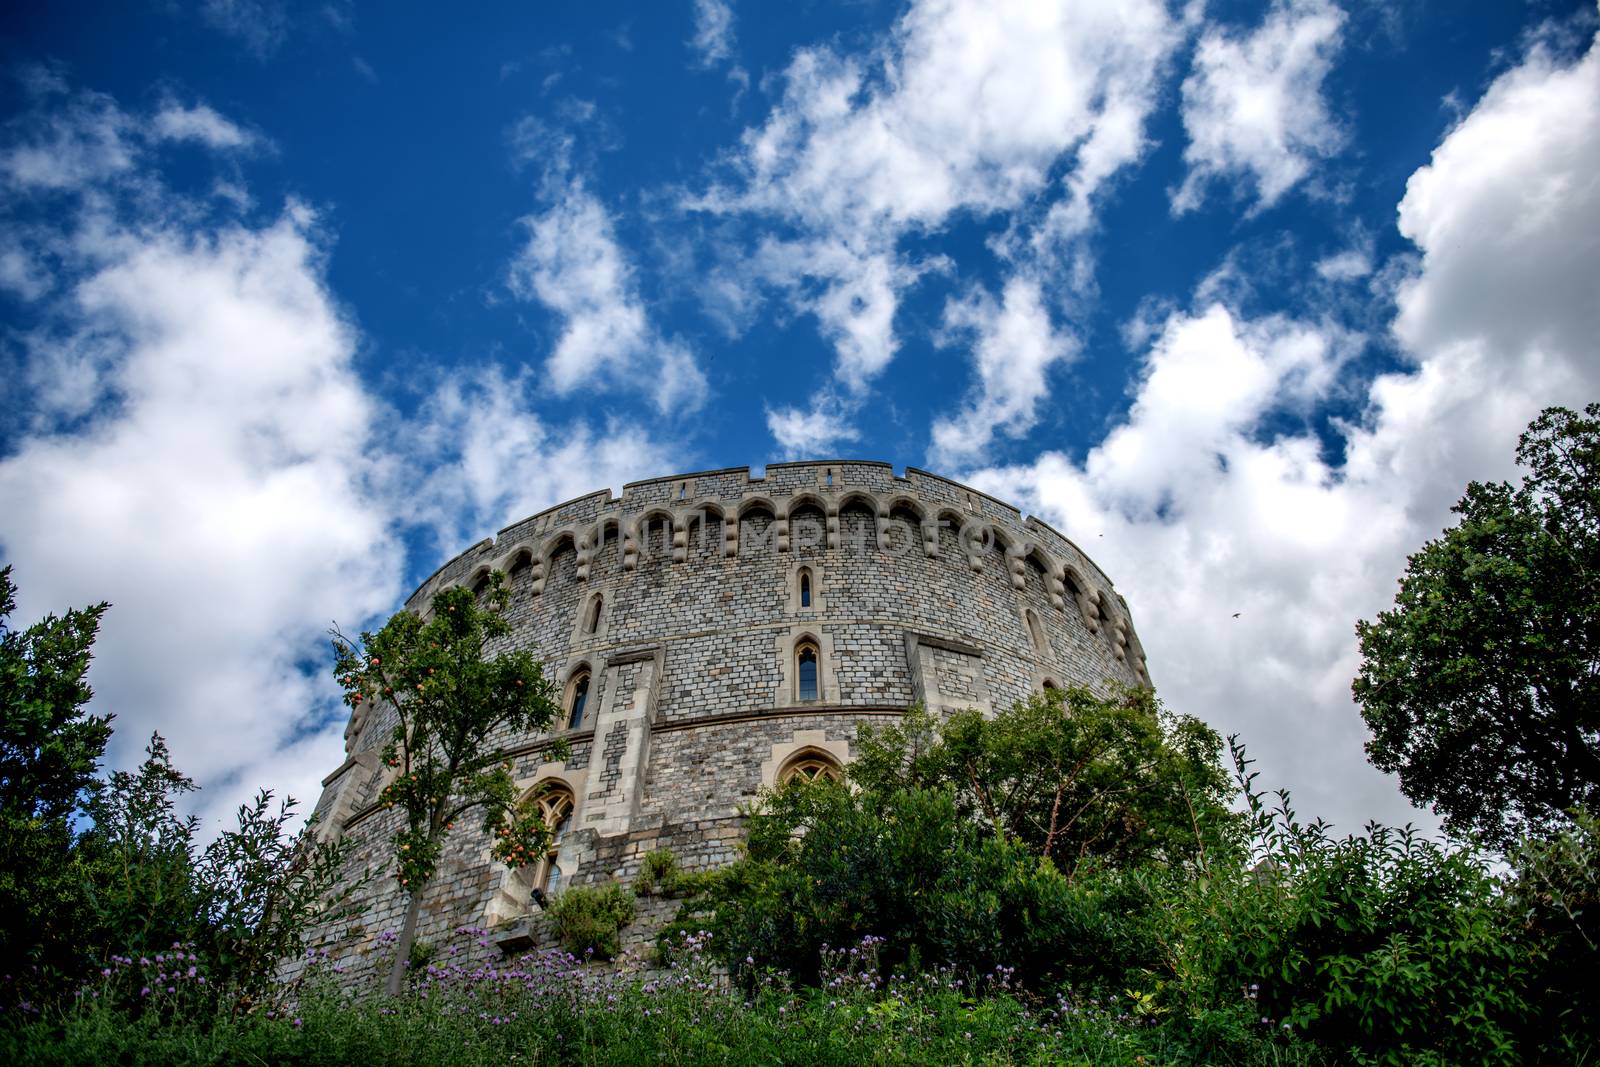 The round tower at Windsor castle in Berkshire by MohanaAntonMeryl